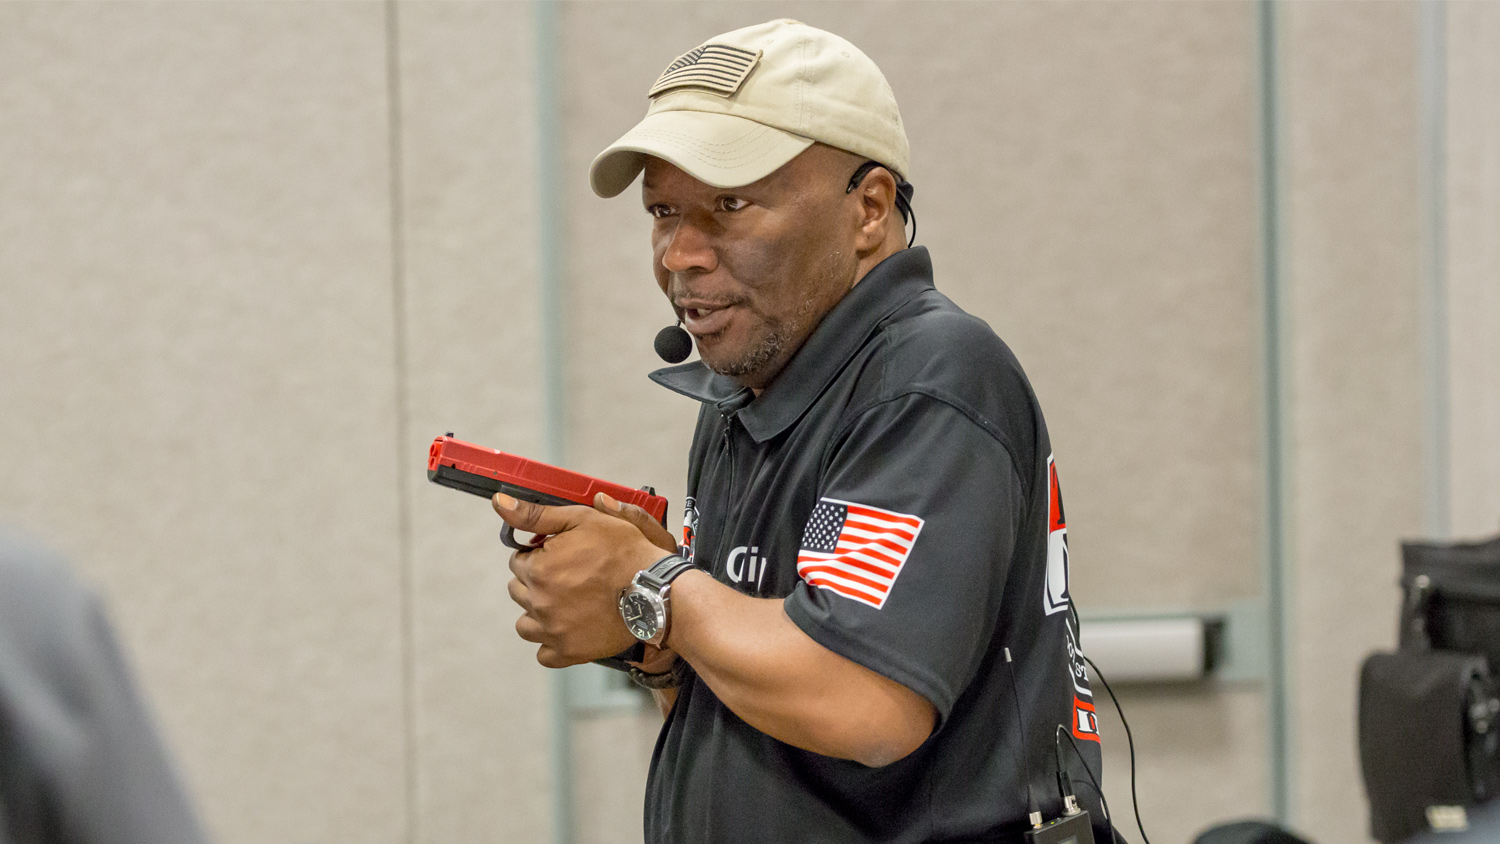 Chip Eberhart dry fire seminar at NRA Carry Guard Expo.